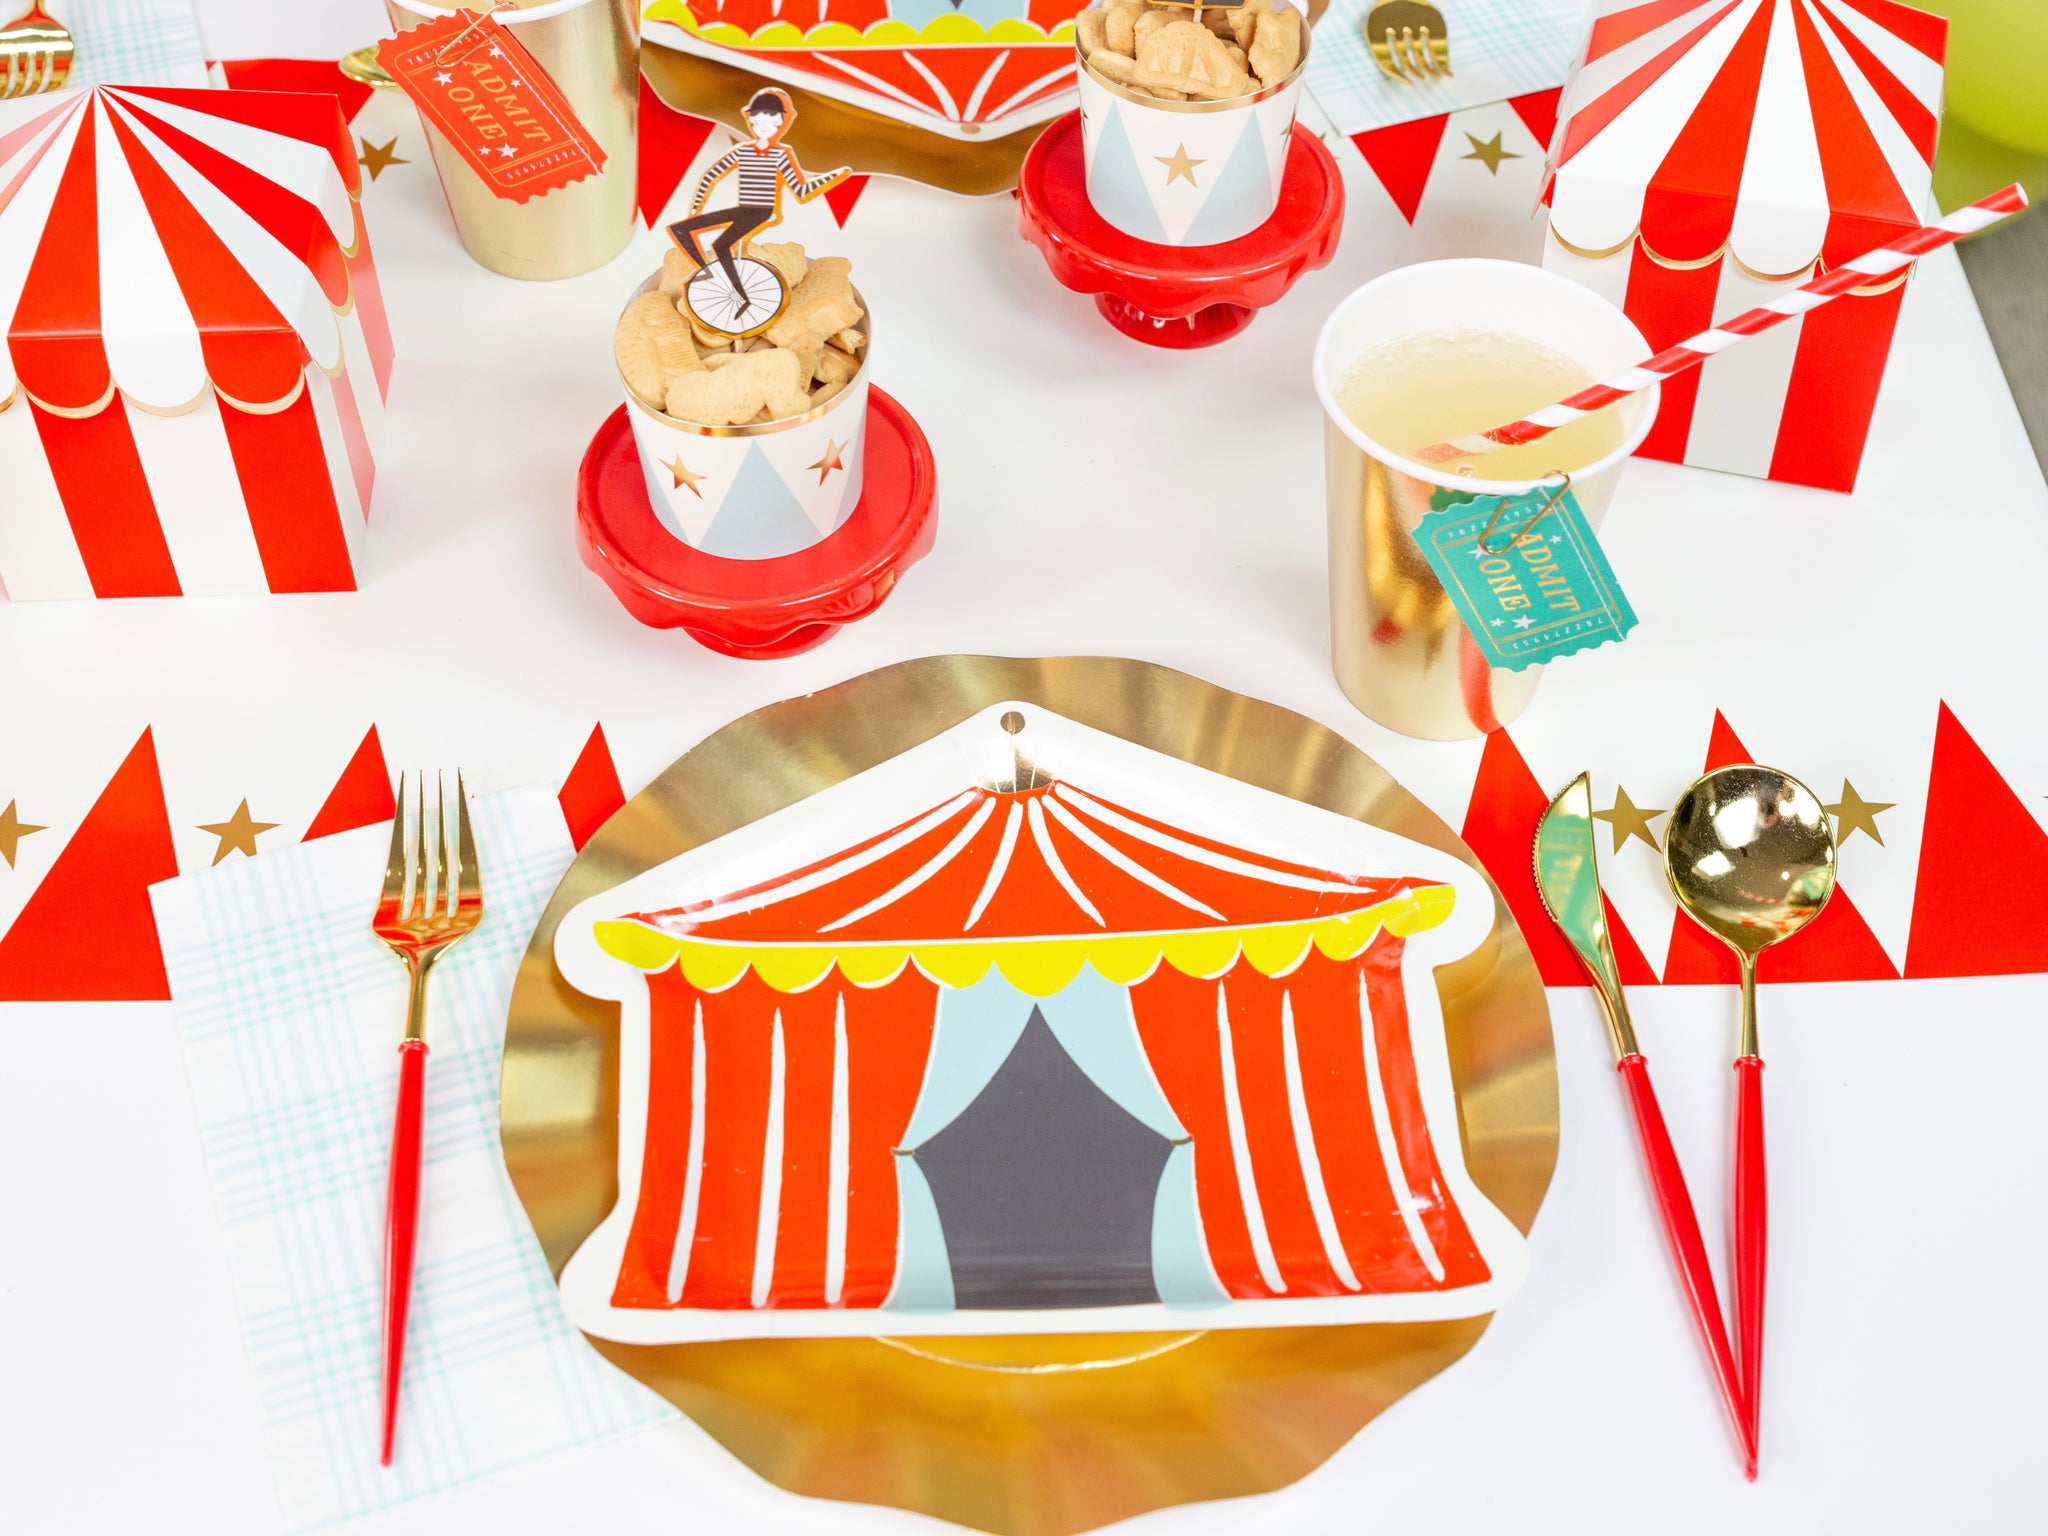 Carnival Tent Plate